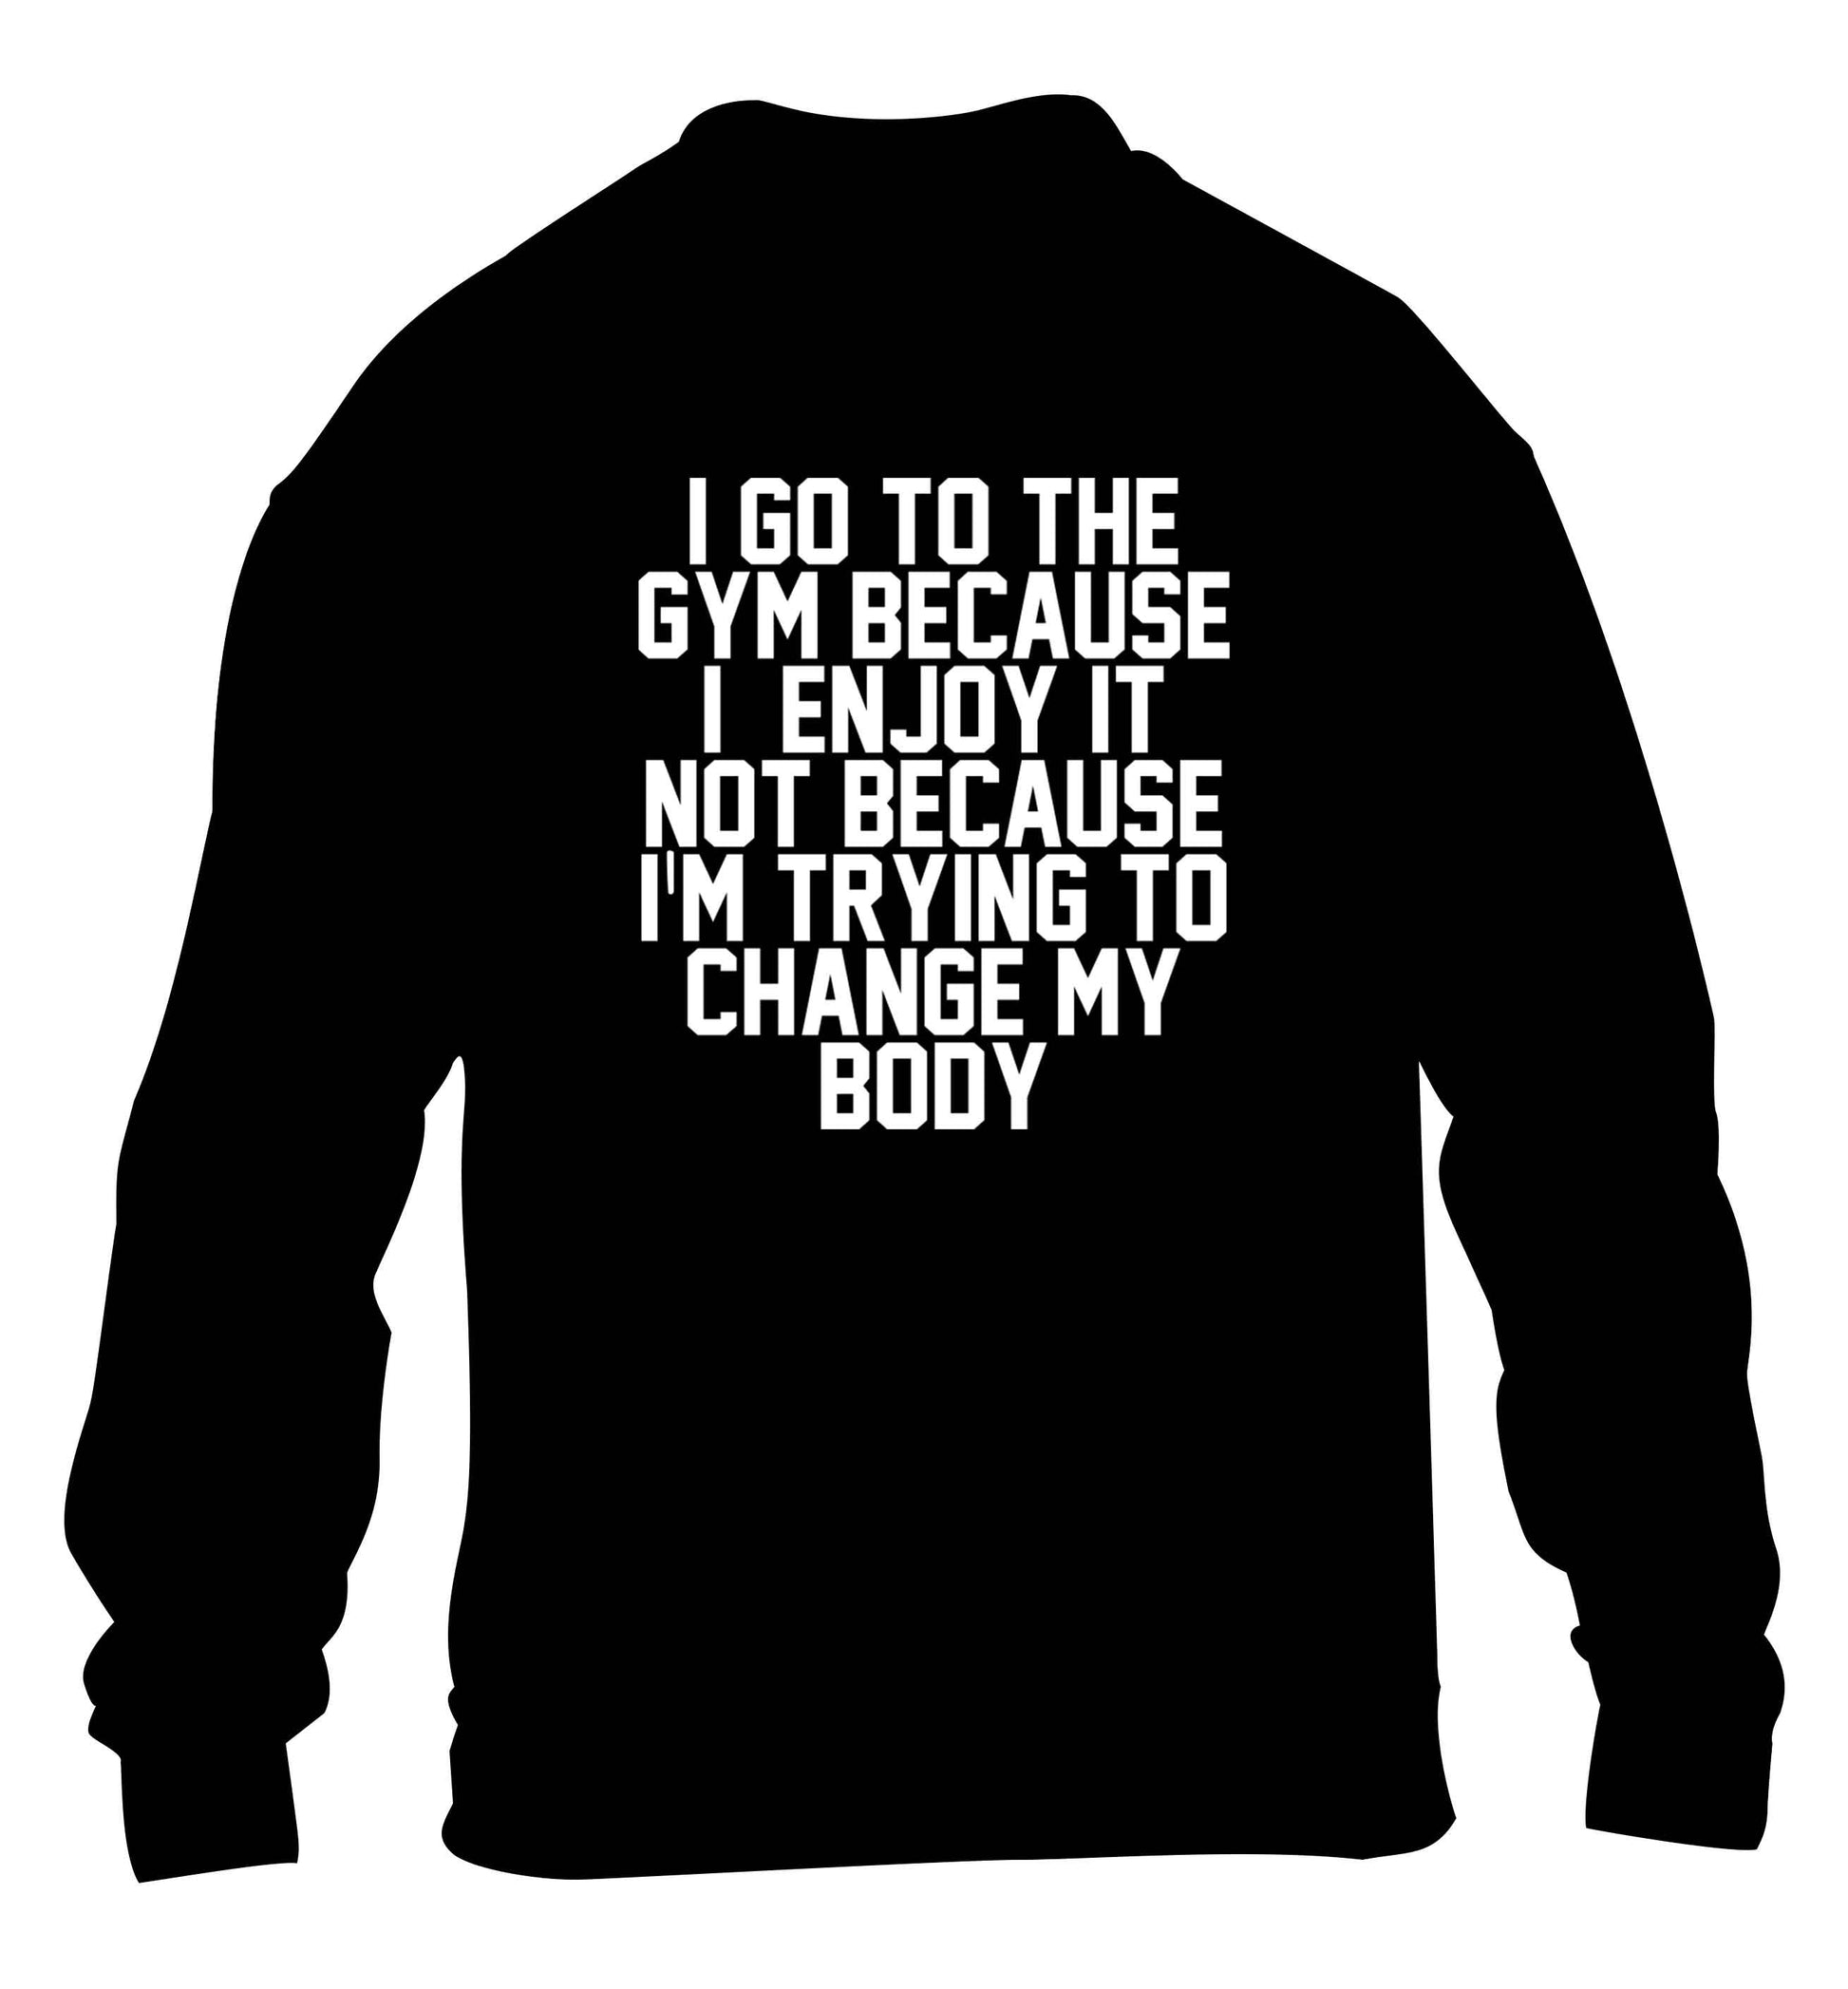 I go to the gym because I enjoy it not because I'm trying to change my body children's black sweater 12-13 Years